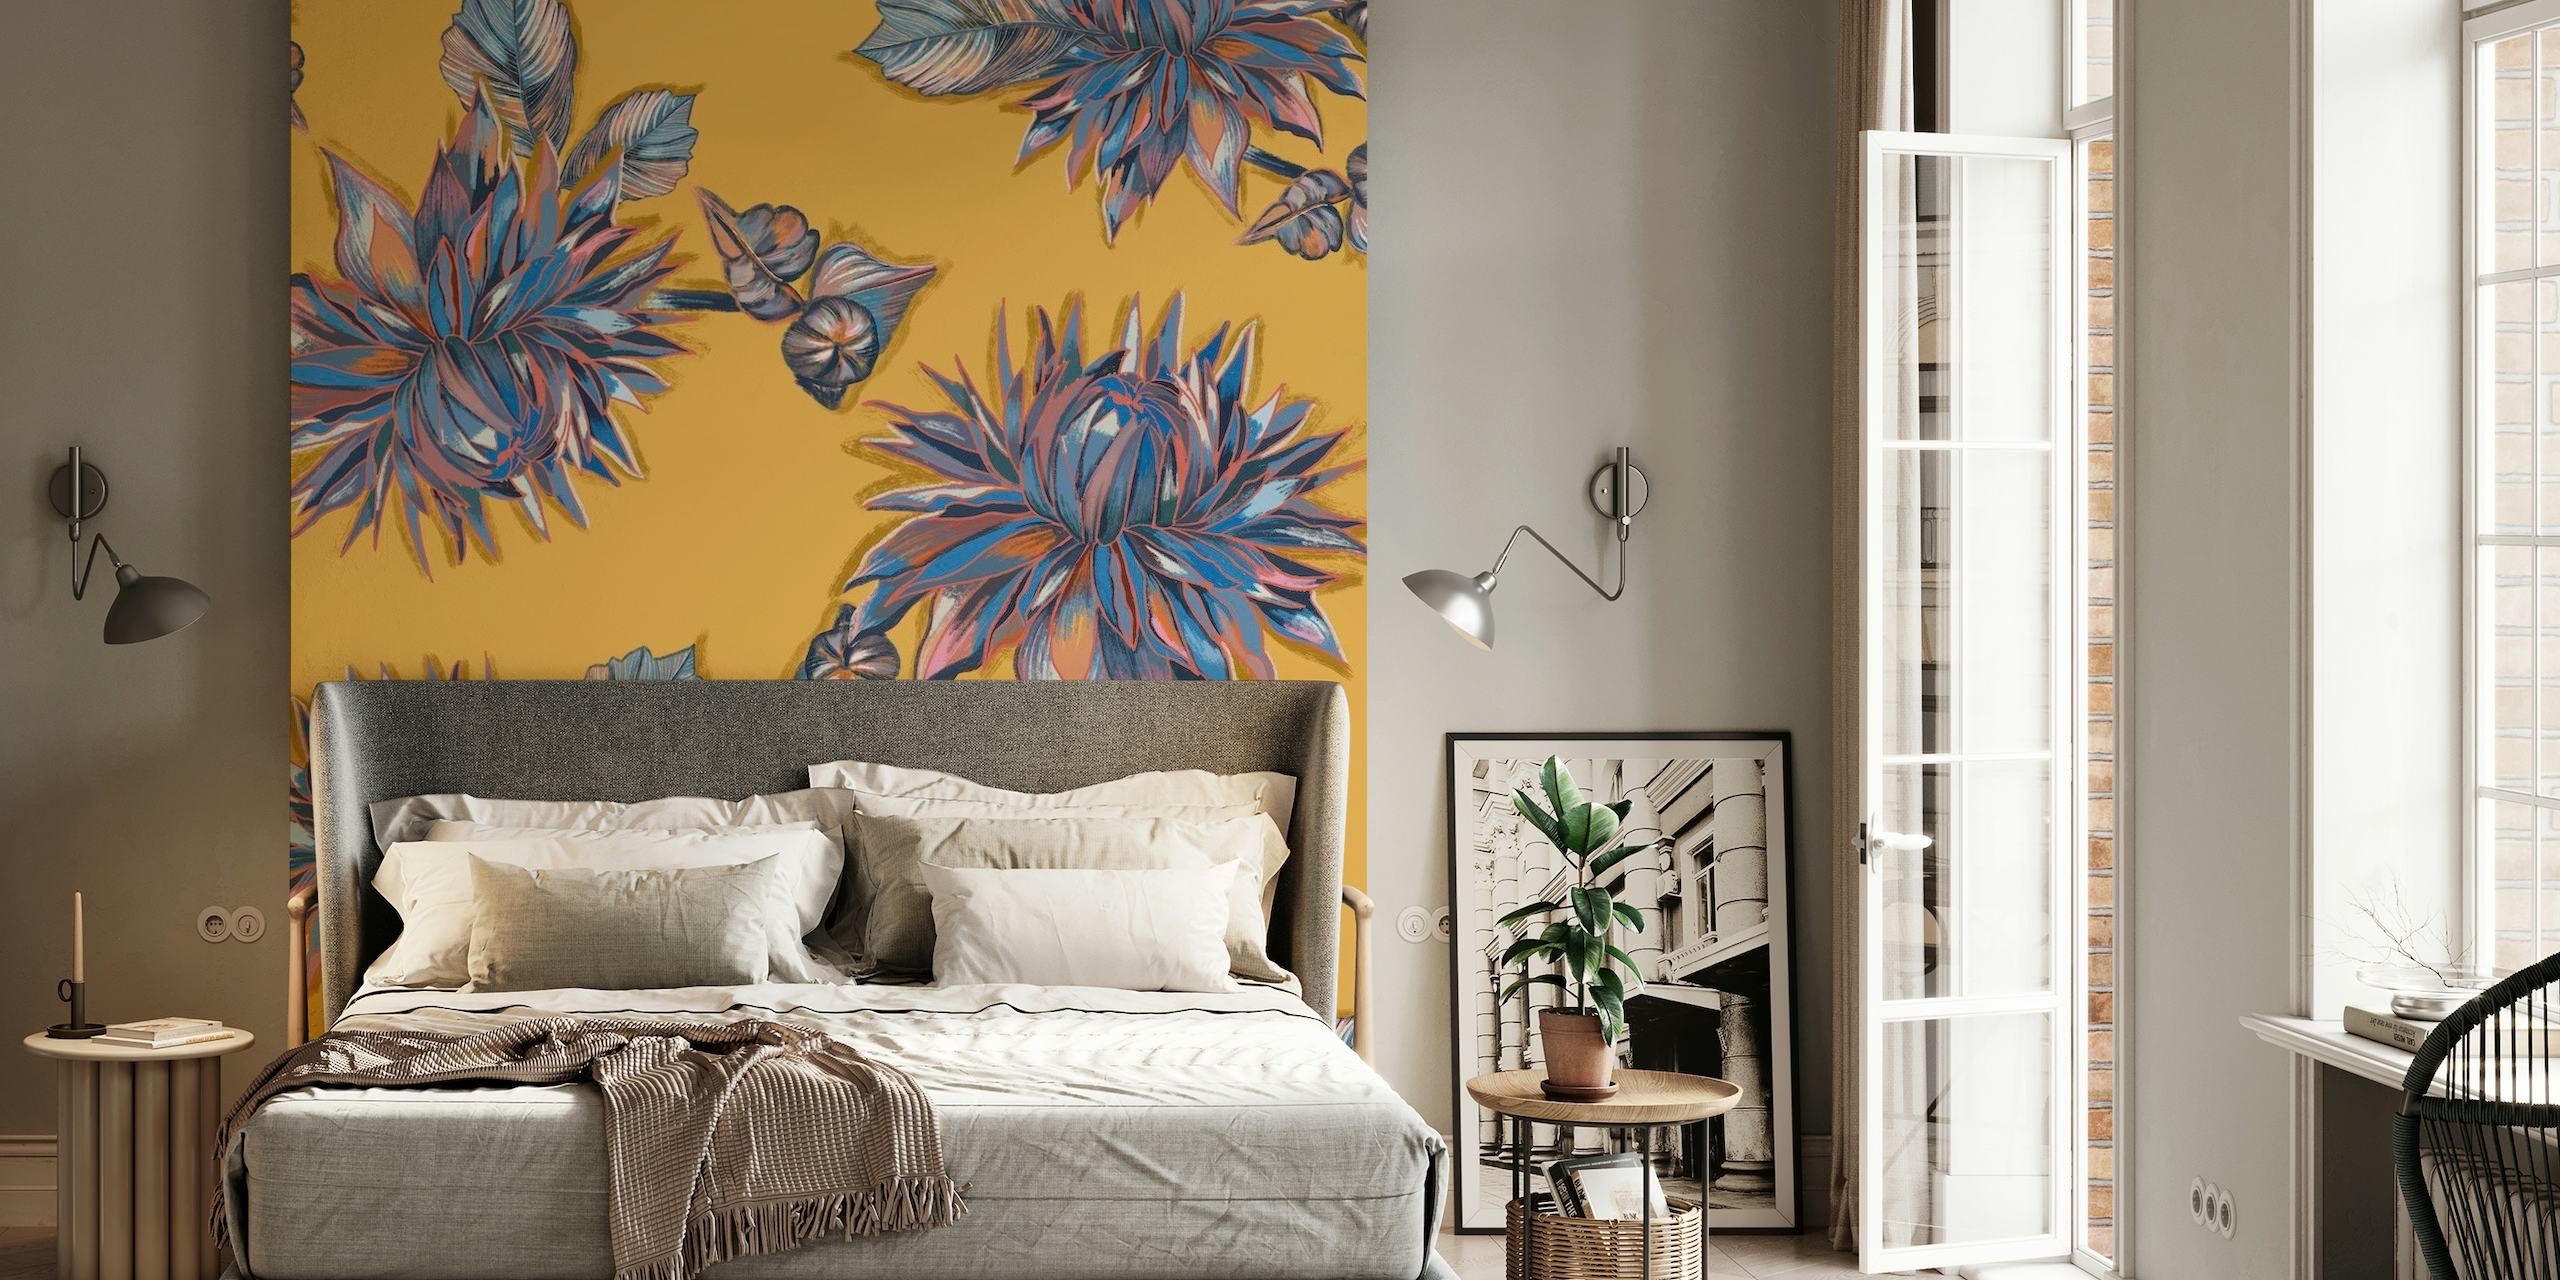 Solo Flower Dahlia Pattern wall mural with vibrant dahlia blooms on a warm background